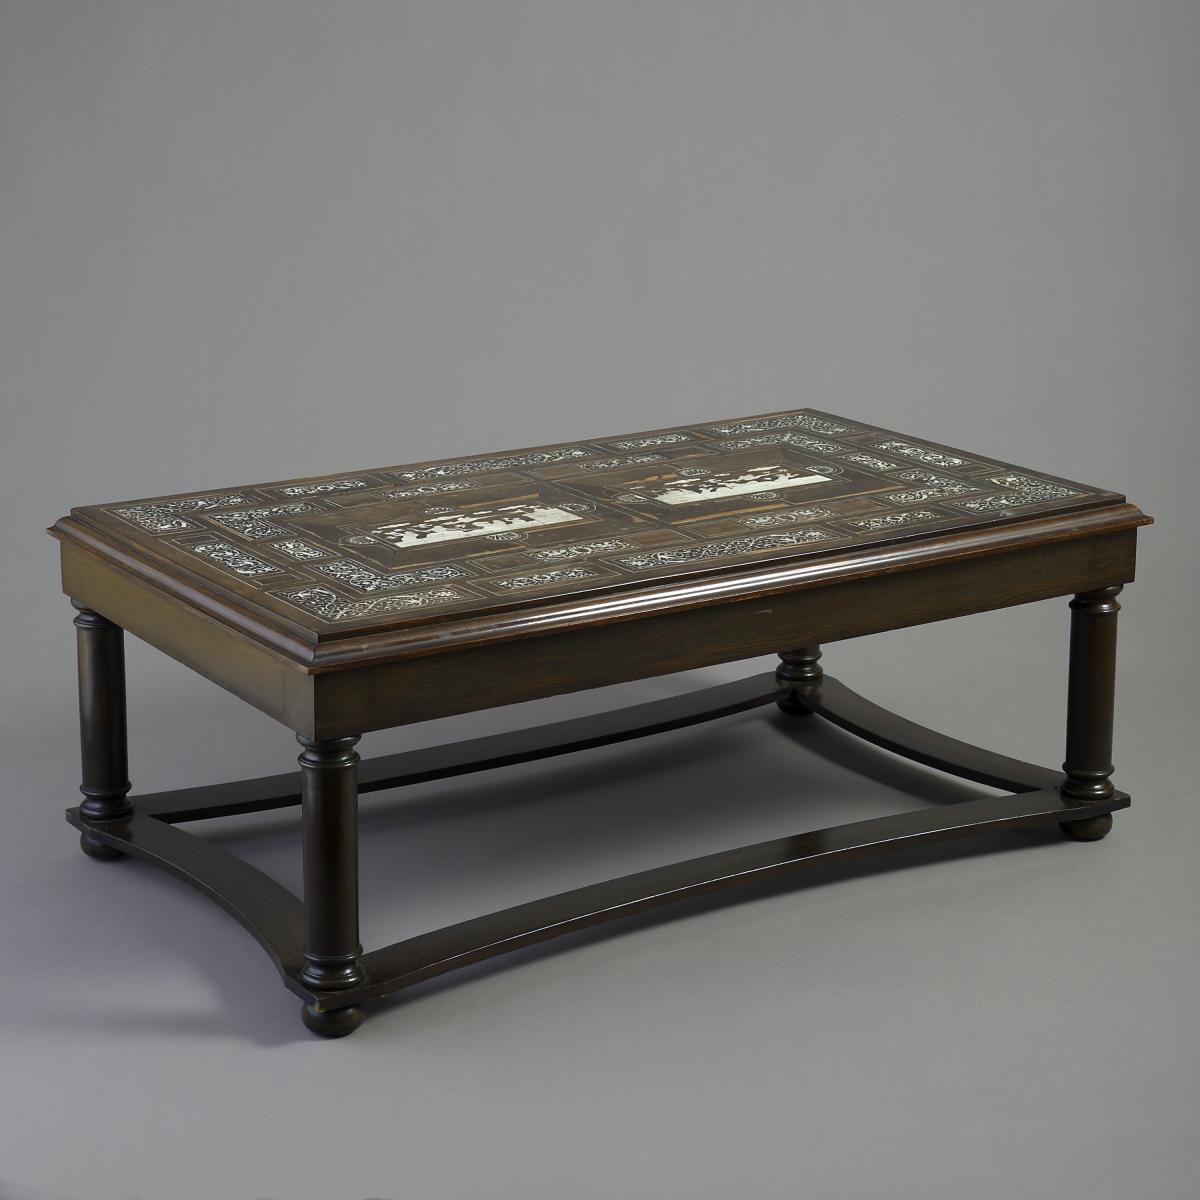 Milanese Ivory and Palisander Low Table